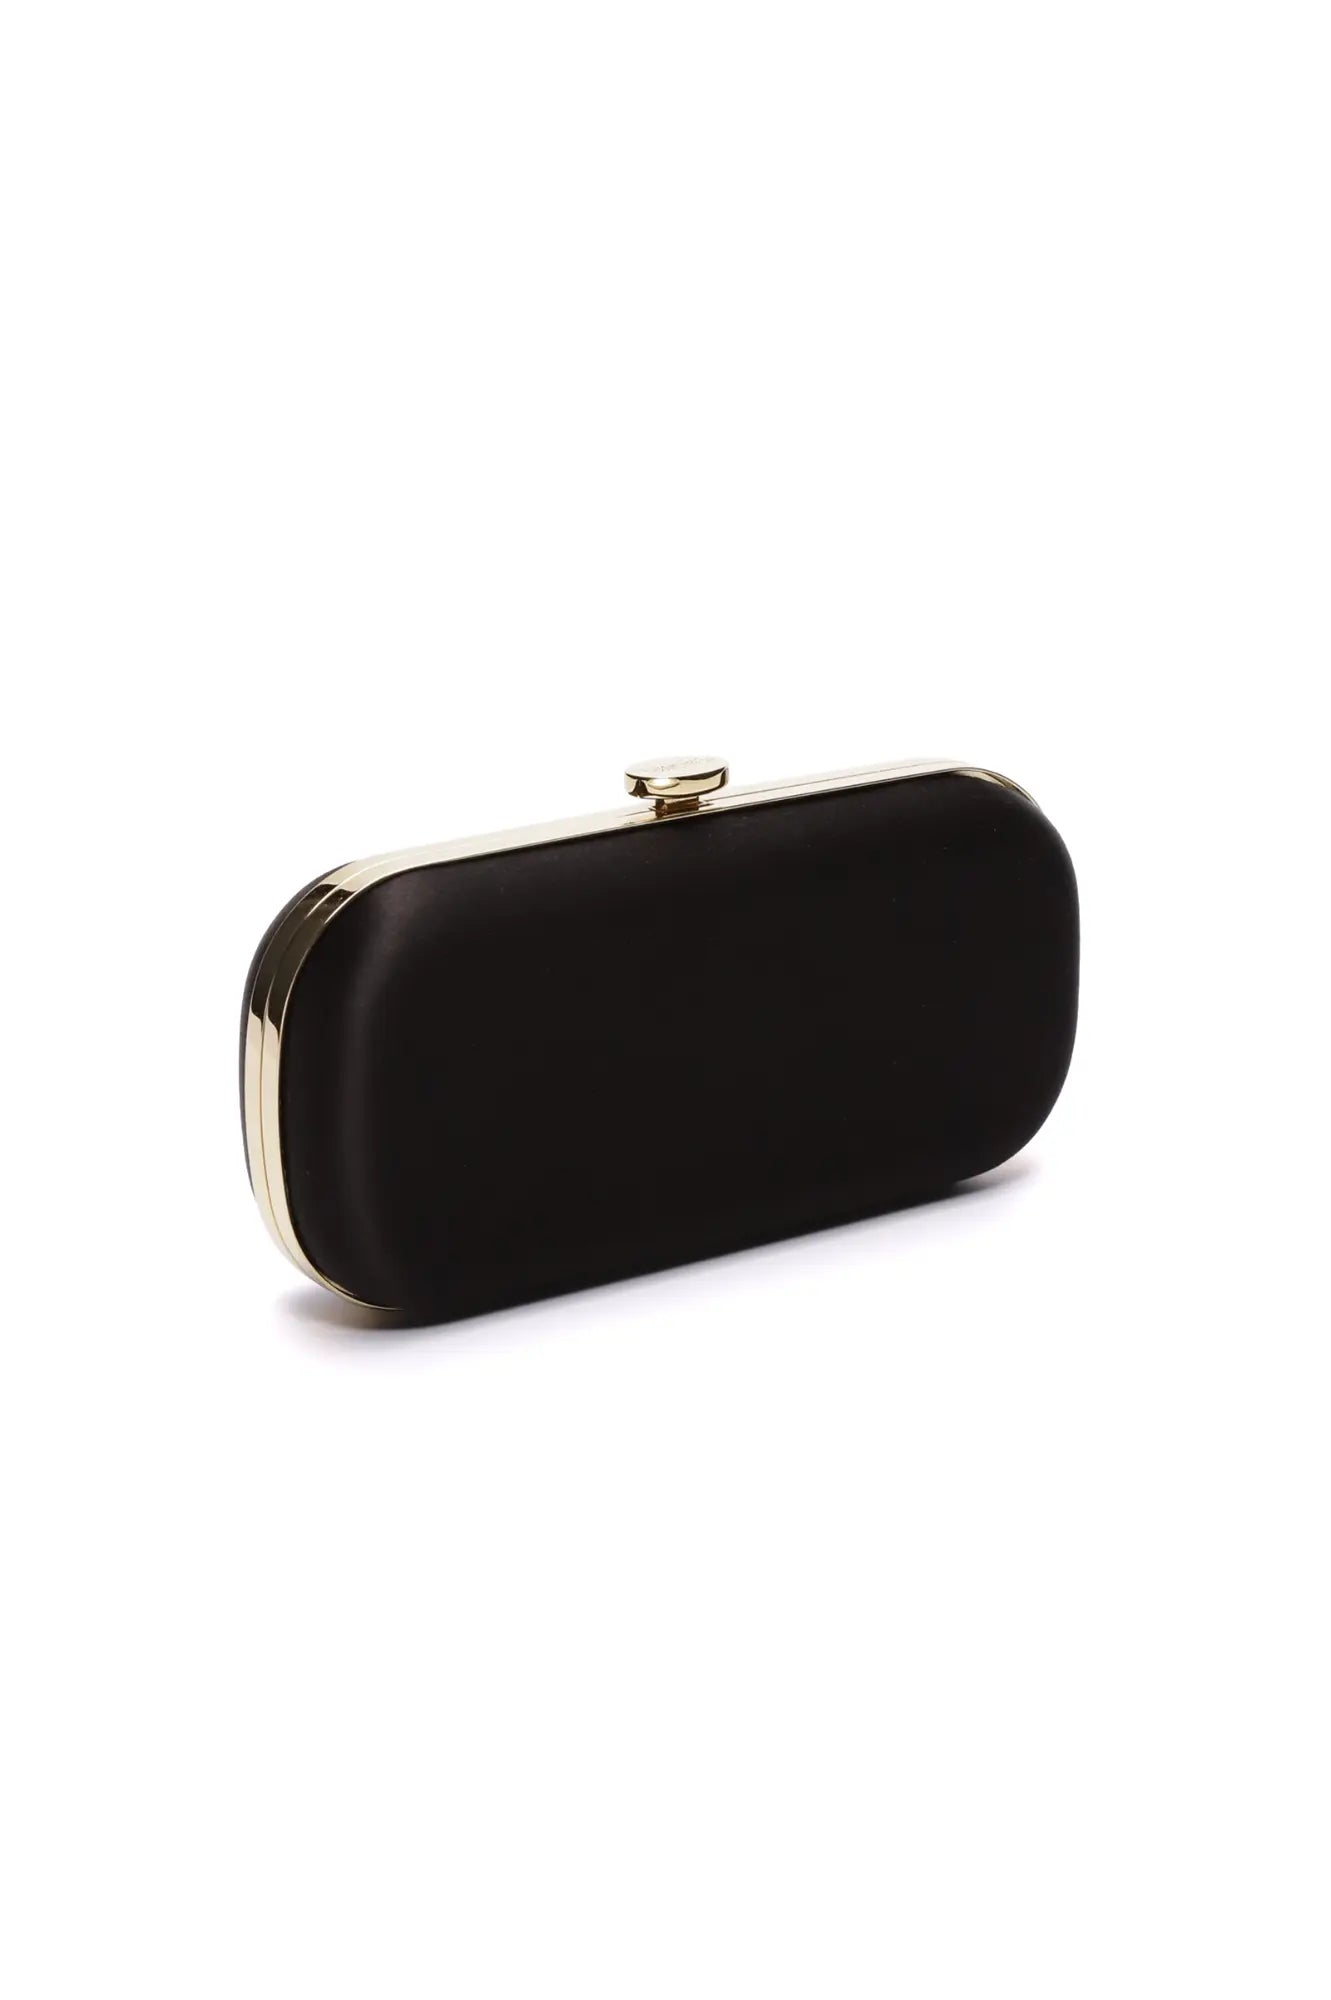 Black-tie accessory Bella Clutch Black Grande with gold detailing on a white background from The Bella Rosa Collection.